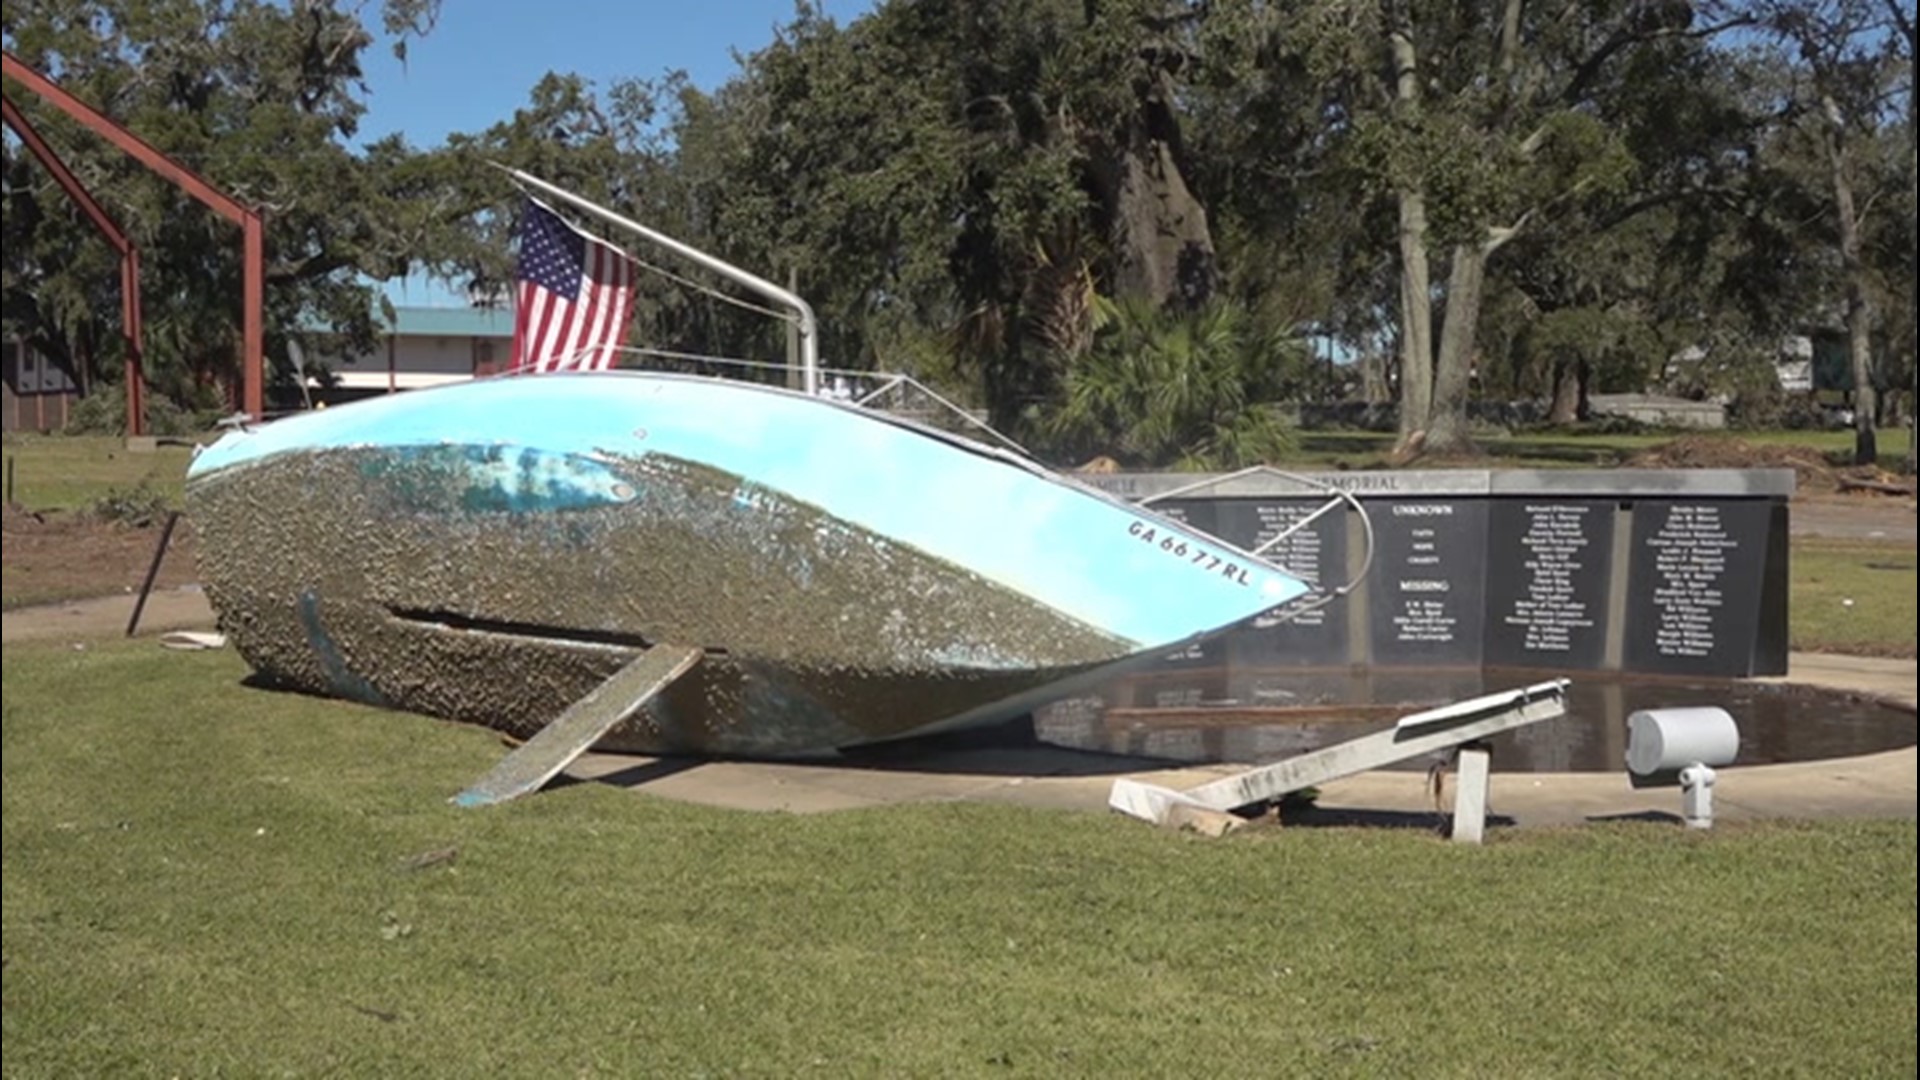 Bill Wadell was in Biloxi, Mississippi, on Oct. 29, where Hurricane Zeta had torn through littering the city with debris.